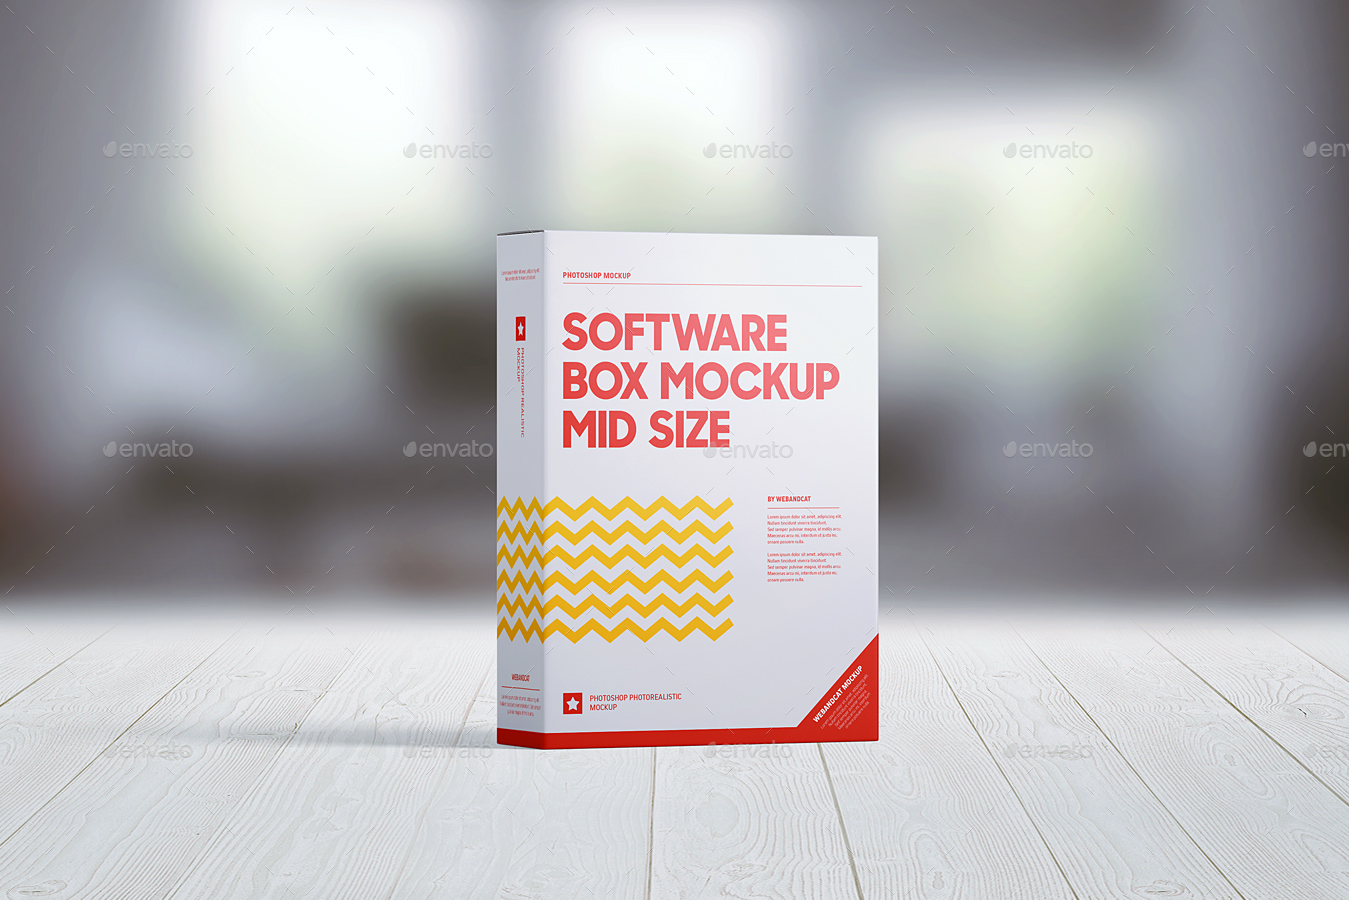 Download Software Box Mock-up by webandcat | GraphicRiver